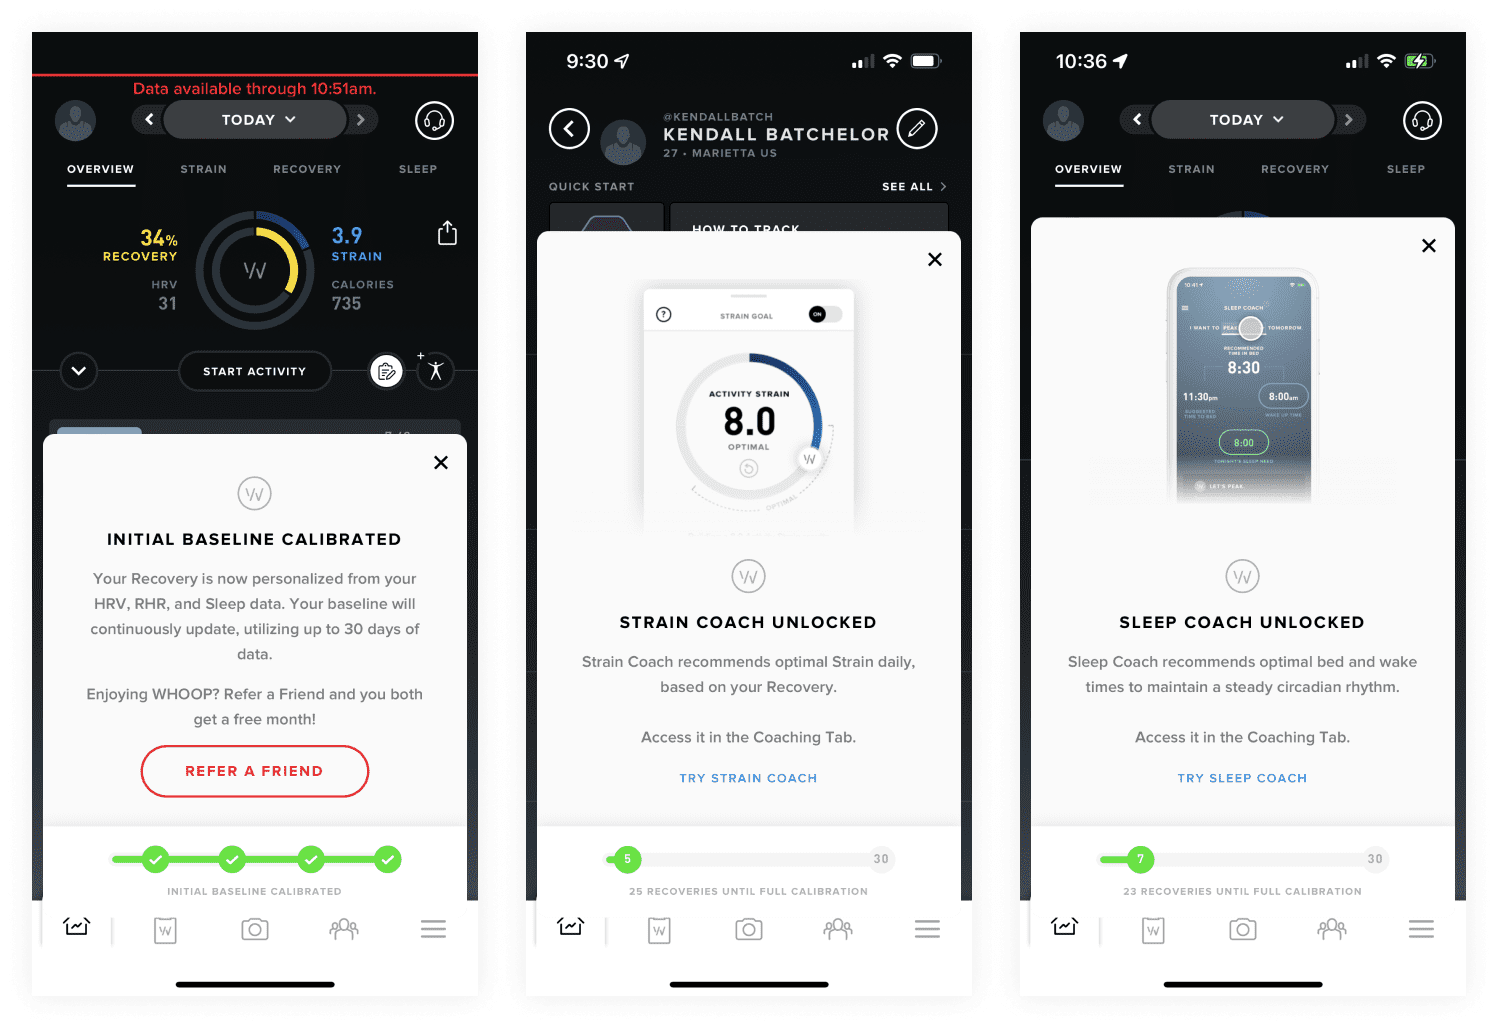 A screenshot of the WHOOP app that shows that the initial baseline has been calibrated, a second screenshot that shows that the strain coach has been unlocked, and a third showing the sleep coach has been unlocked.